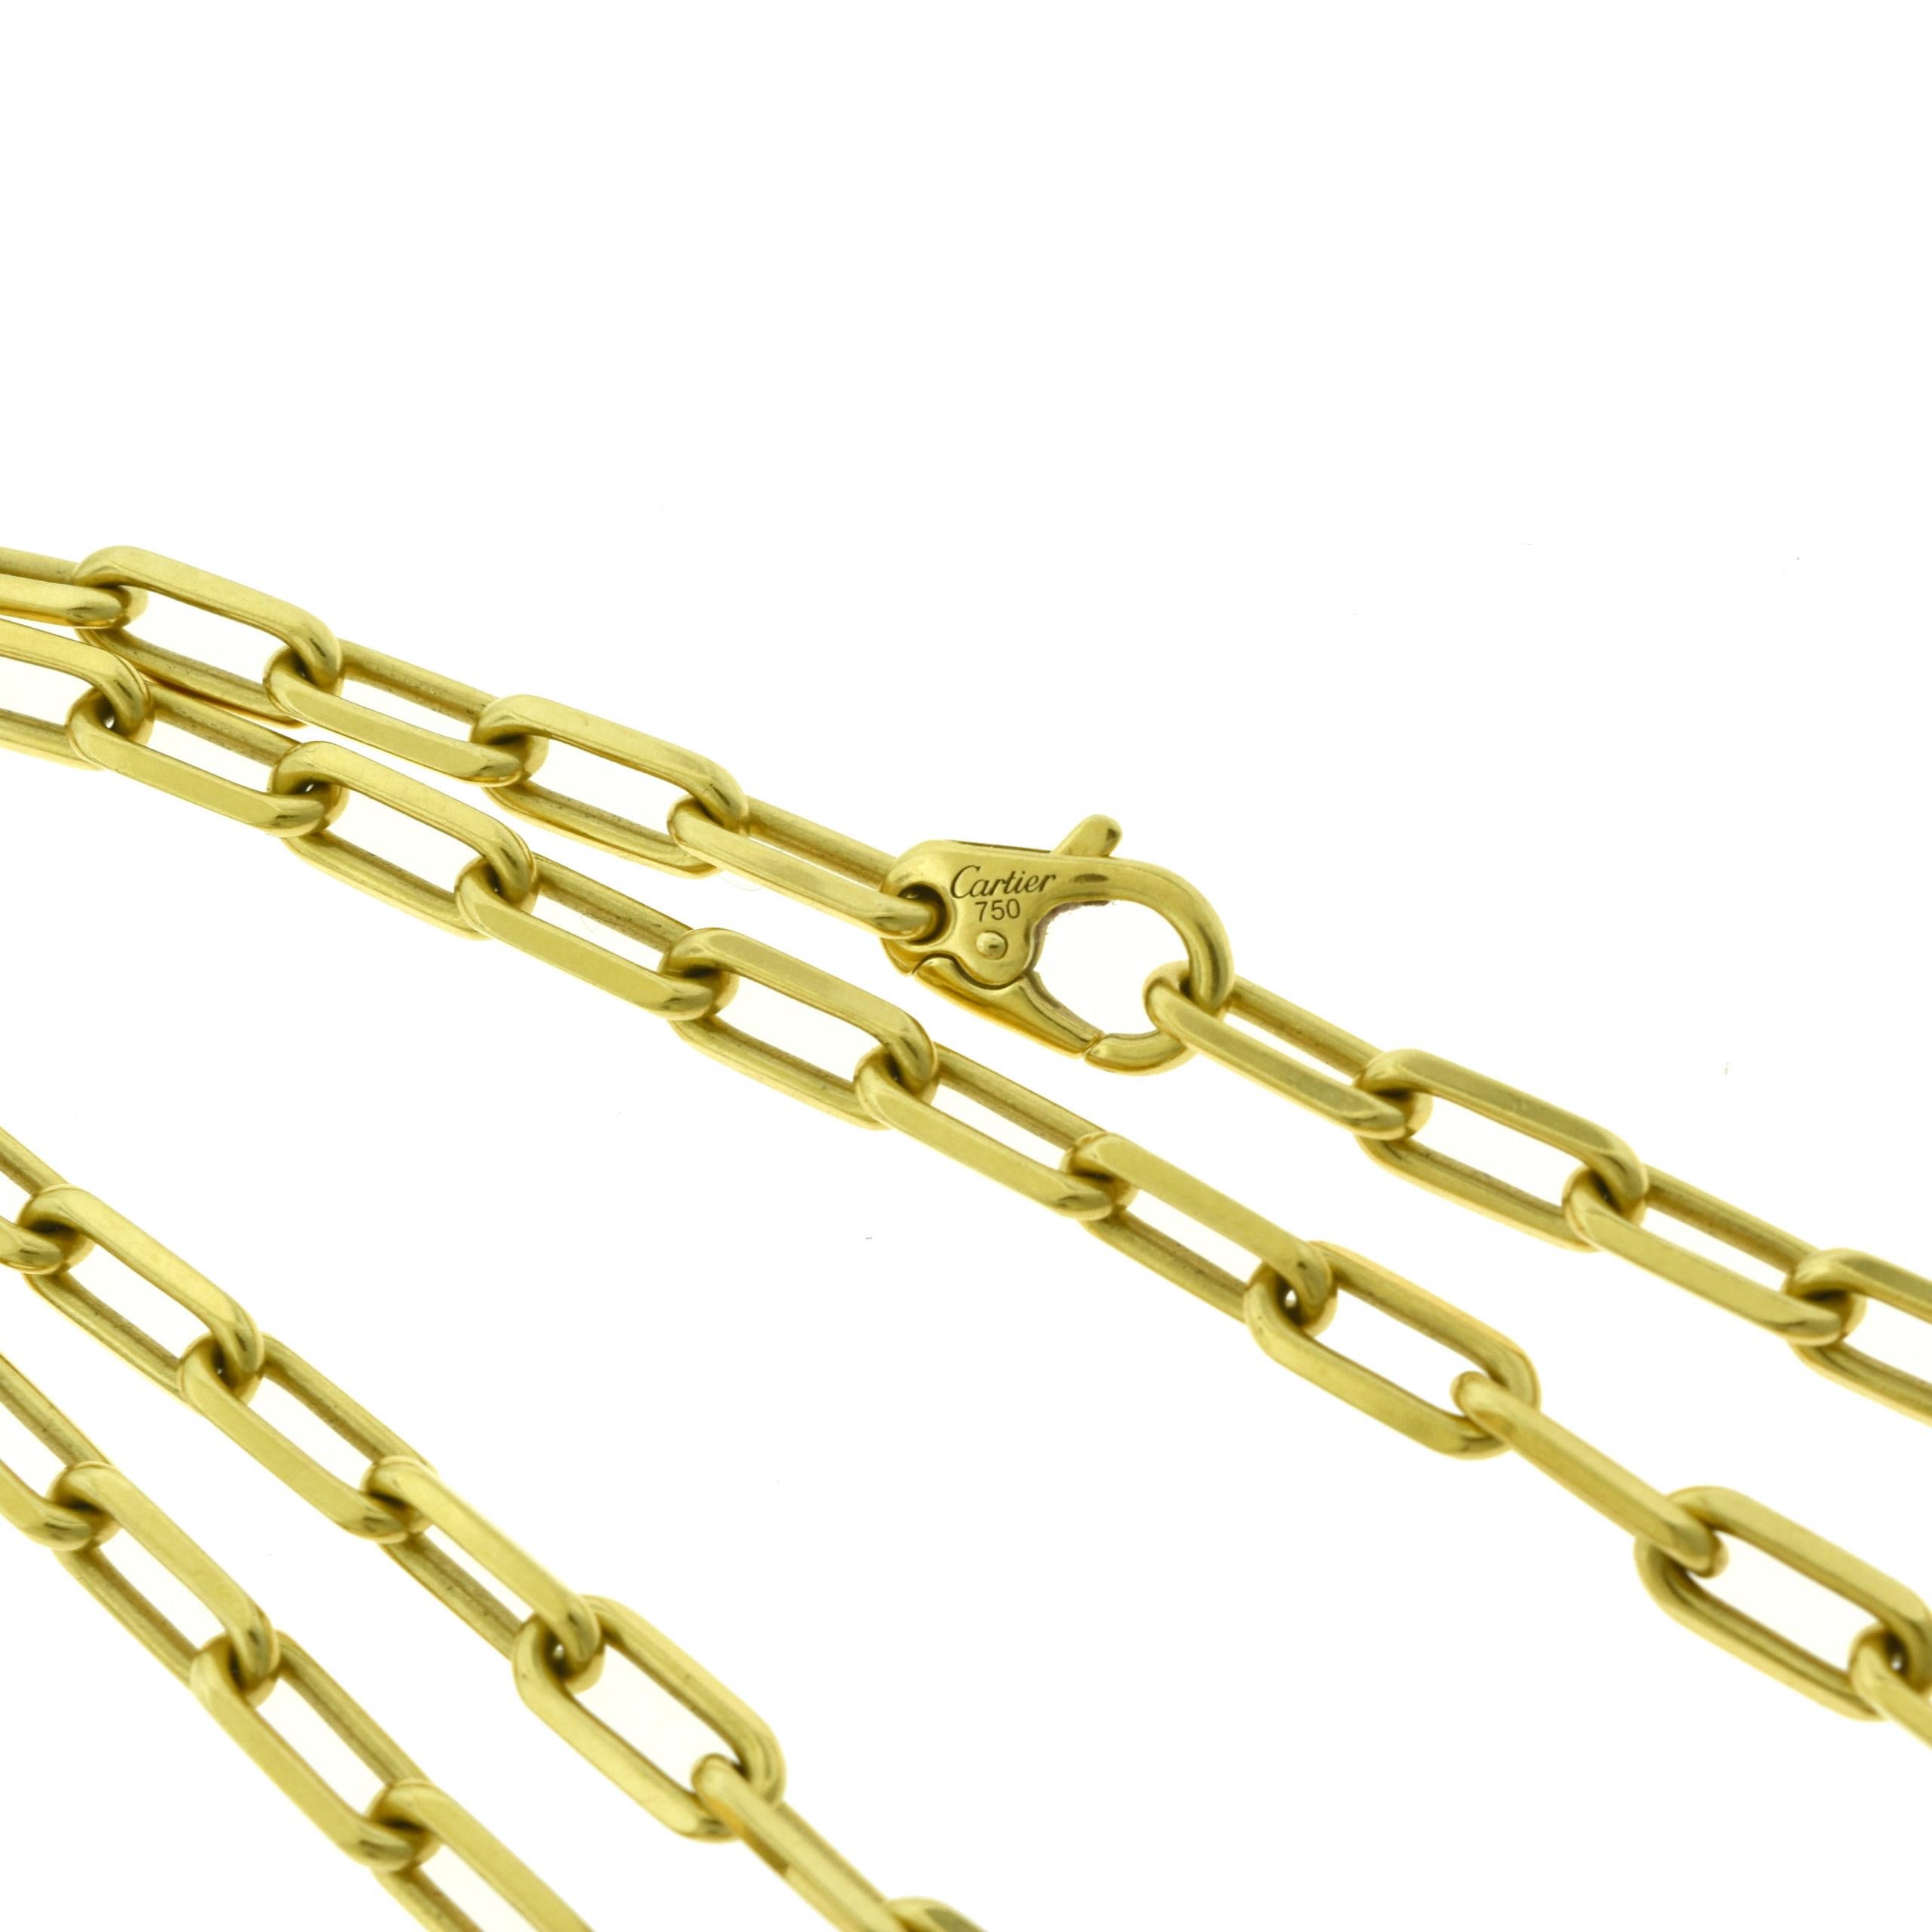 Designer: Cartier

Collection: Santos de Cartier

Style: Chain Link Necklace

Metal: Yellow Gold

Metal Purity: 18k

Total Item Weight (grams): 55

Necklace Length: 22 inches

Signature: Cartier 